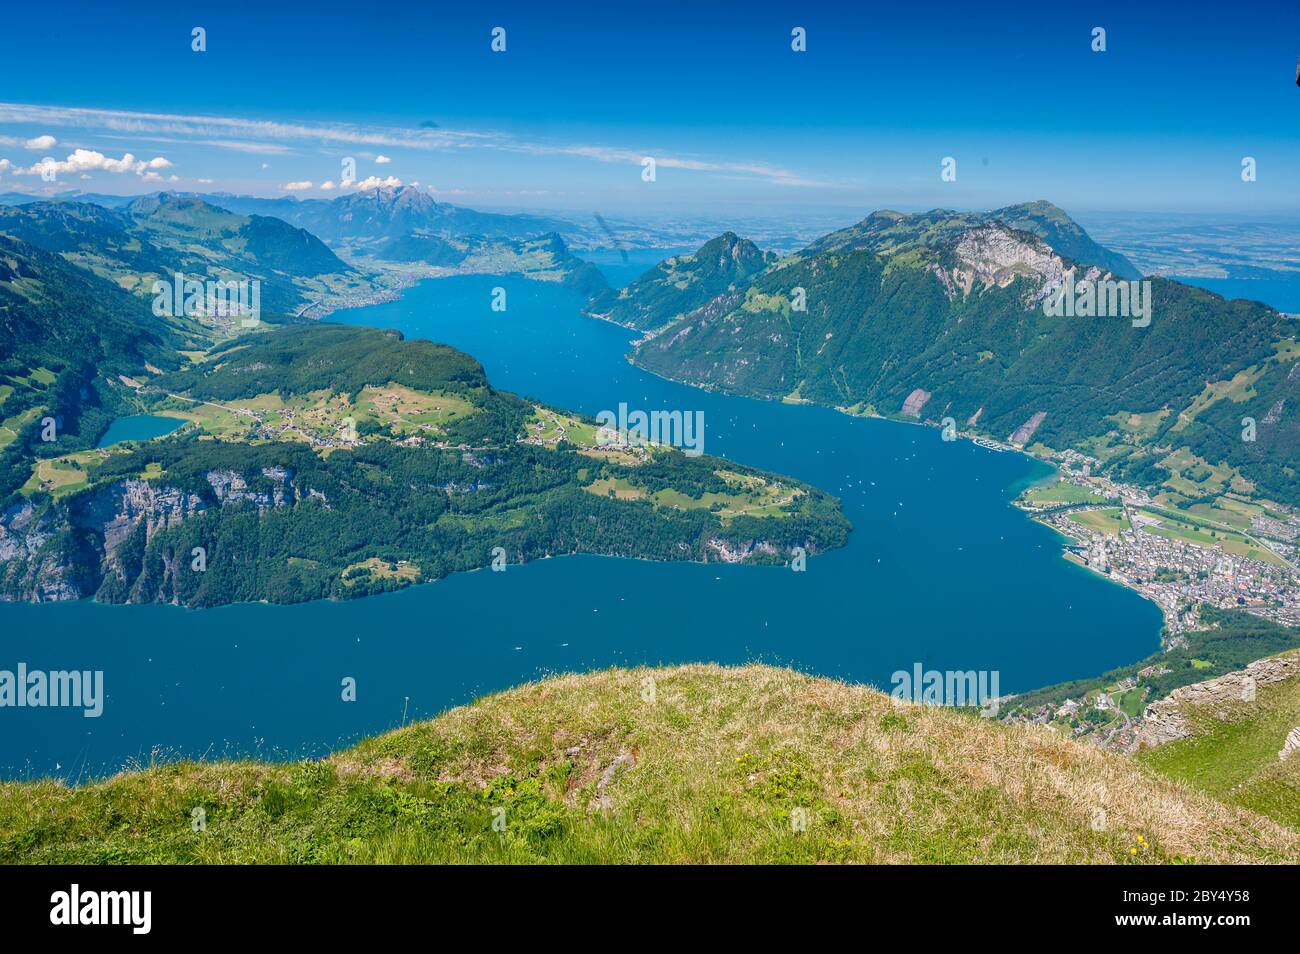 Wiege High Resolution Stock Photography and Images - Alamy